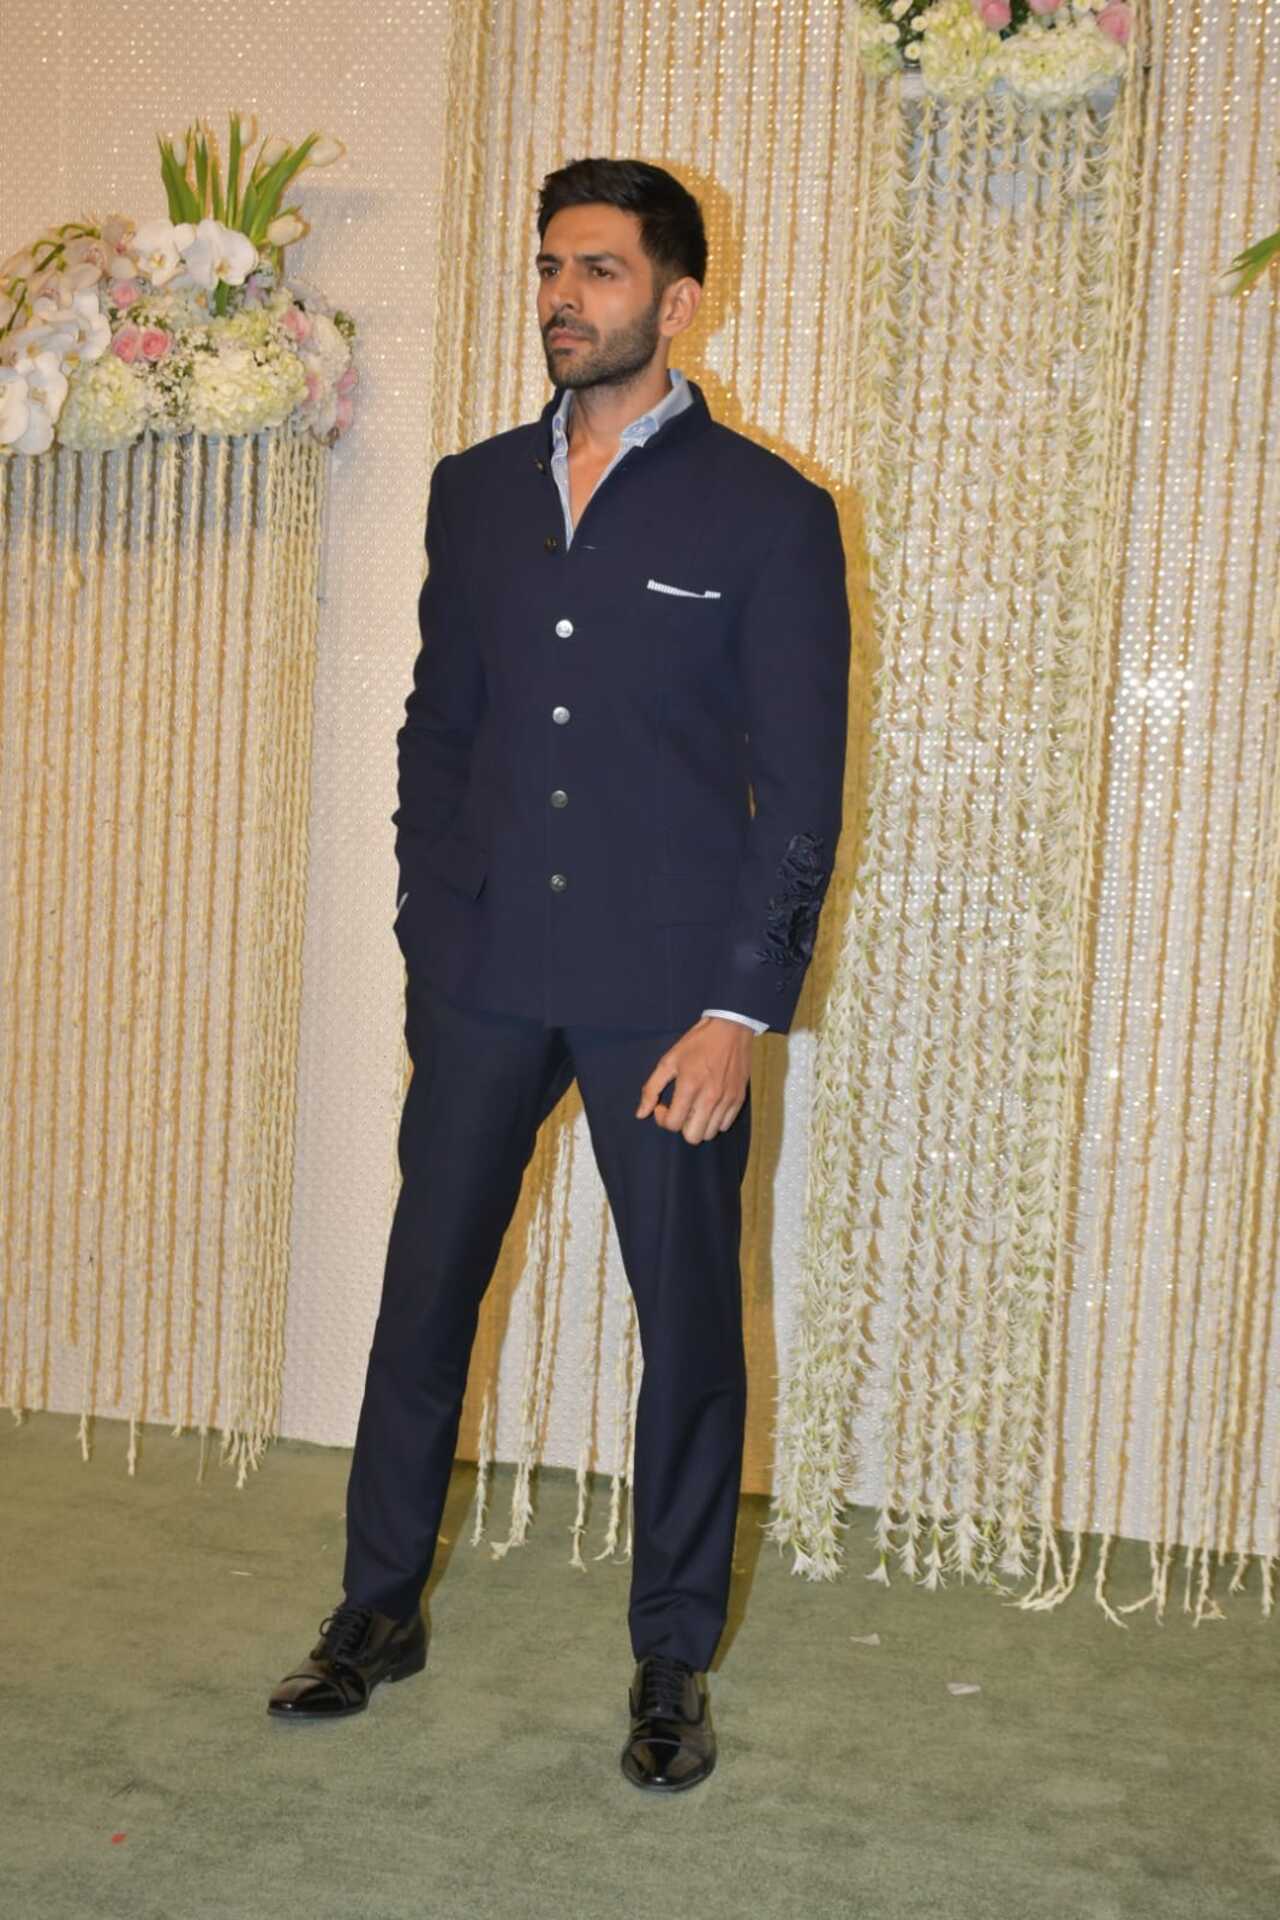 Kartik Aaryan stood out with his sharp look in this blue outfit, his short hair, and stubble